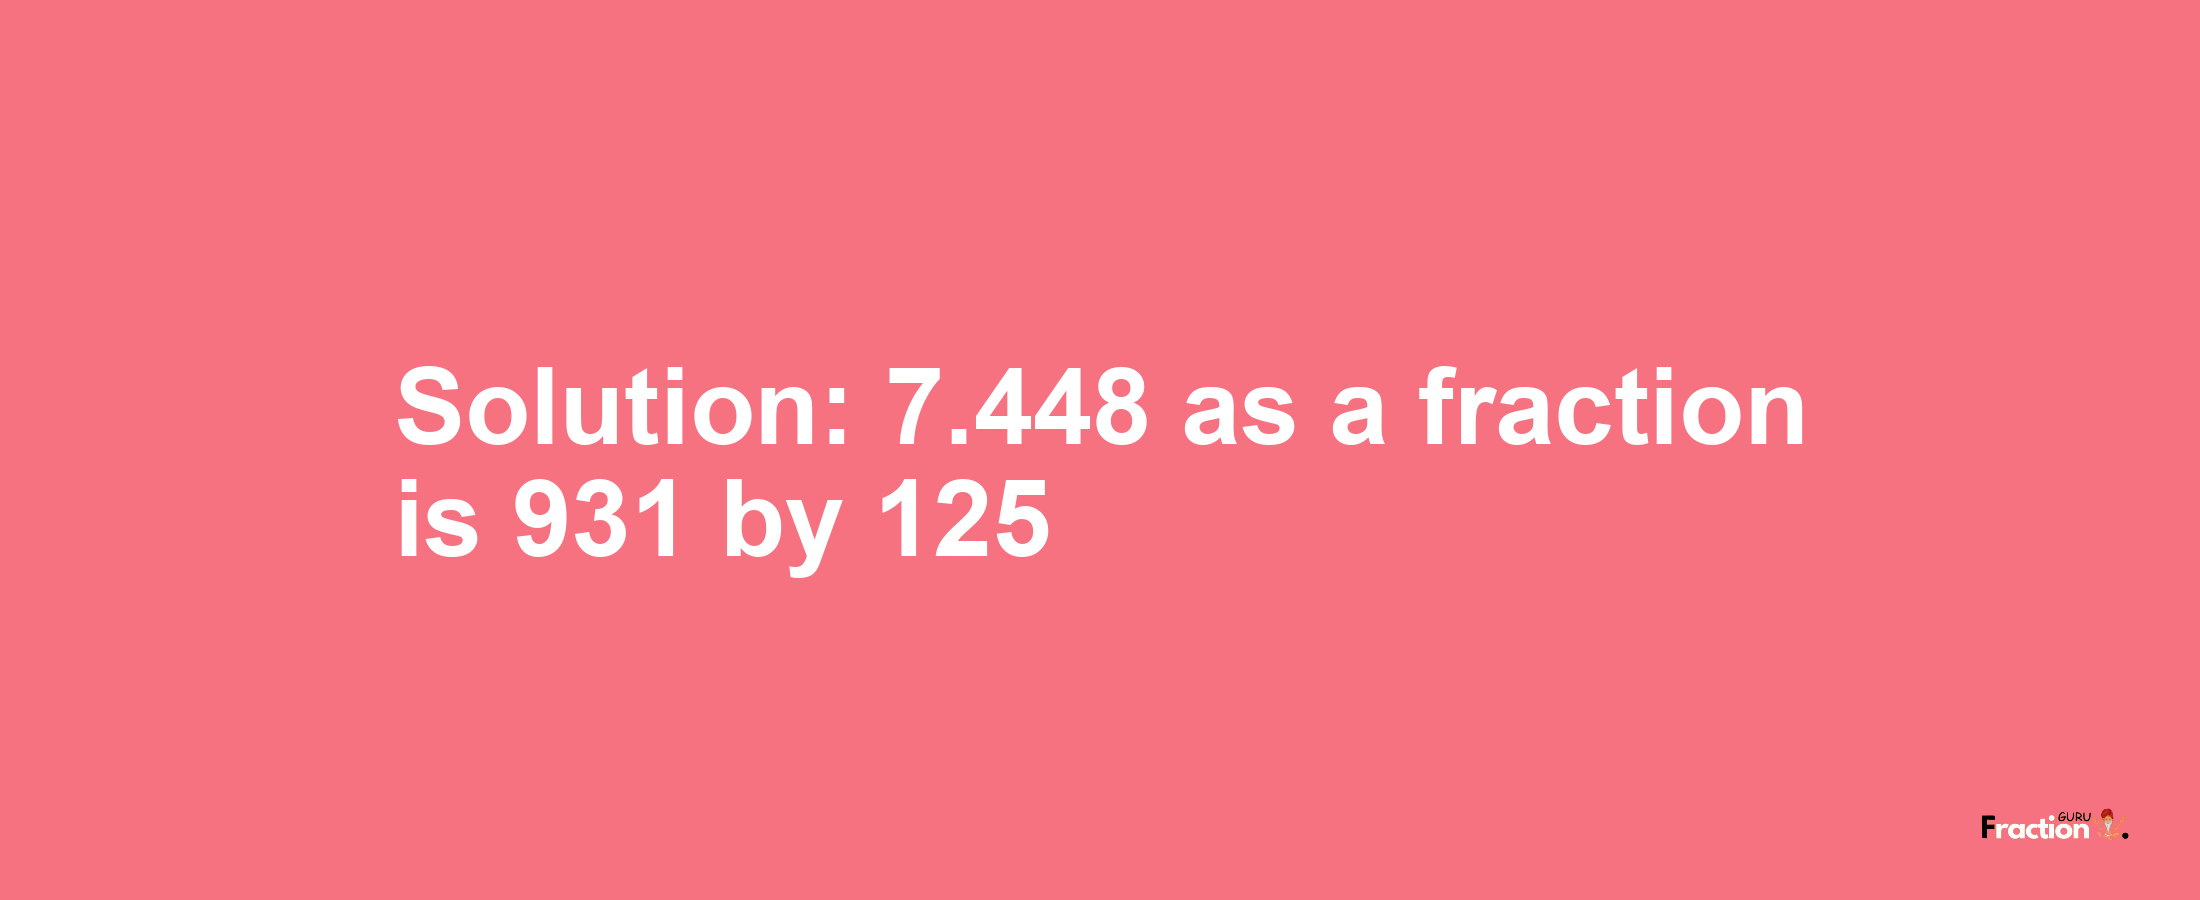 Solution:7.448 as a fraction is 931/125